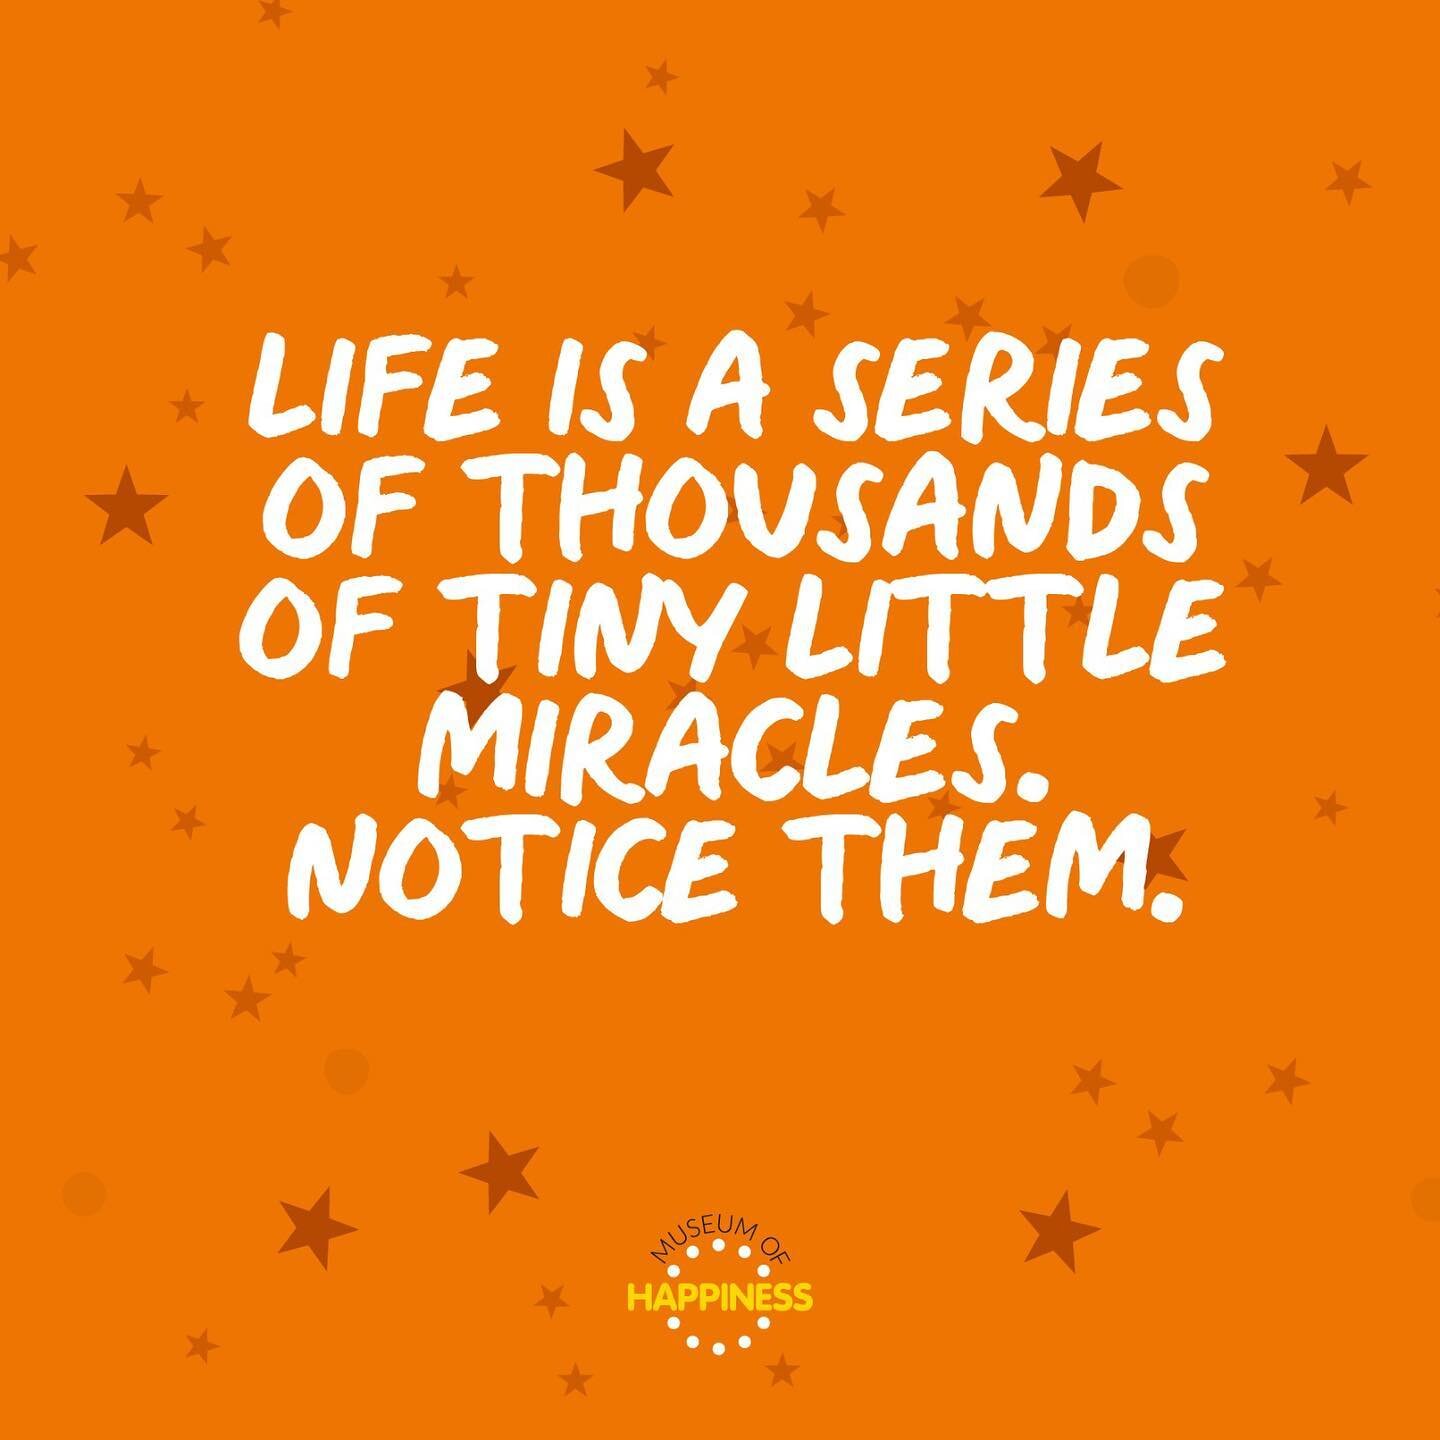 When we slow down and seek out the extraordinary in the ordinary&hellip; we can realise that life is a series of miracles 💫

You are a miracle, your body is a miracle, and this life is a miracle 💫